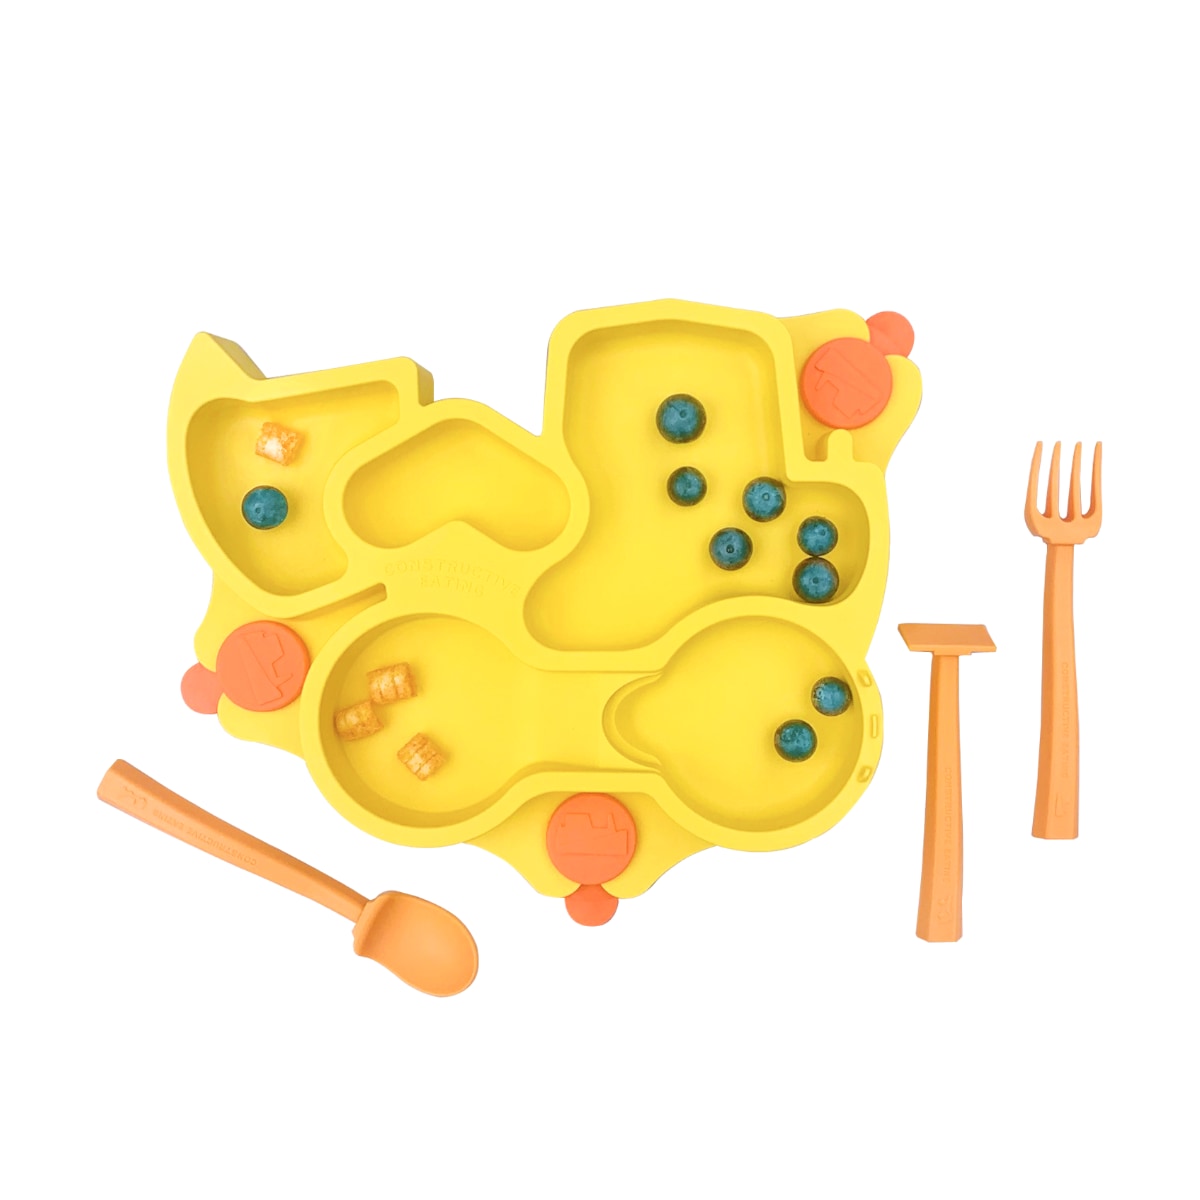 Constructive Eating Box- Yellow Plate & Orange Utensils by Constructive Eating